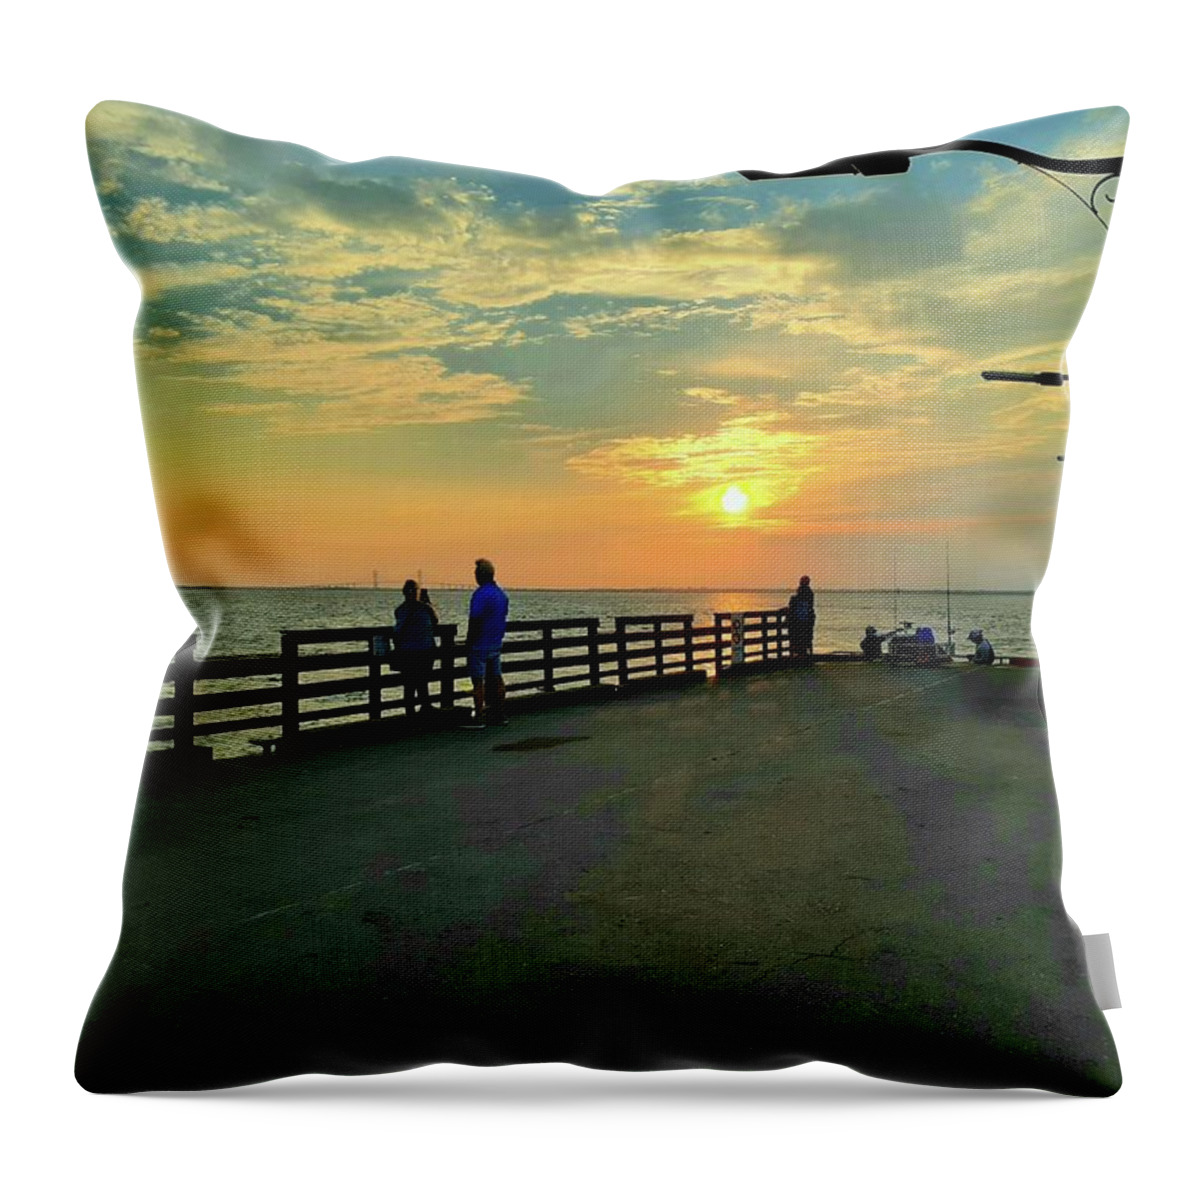 Sunsets Islands. Throw Pillow featuring the photograph Saint Simons Island Sunset by Victor Thomason